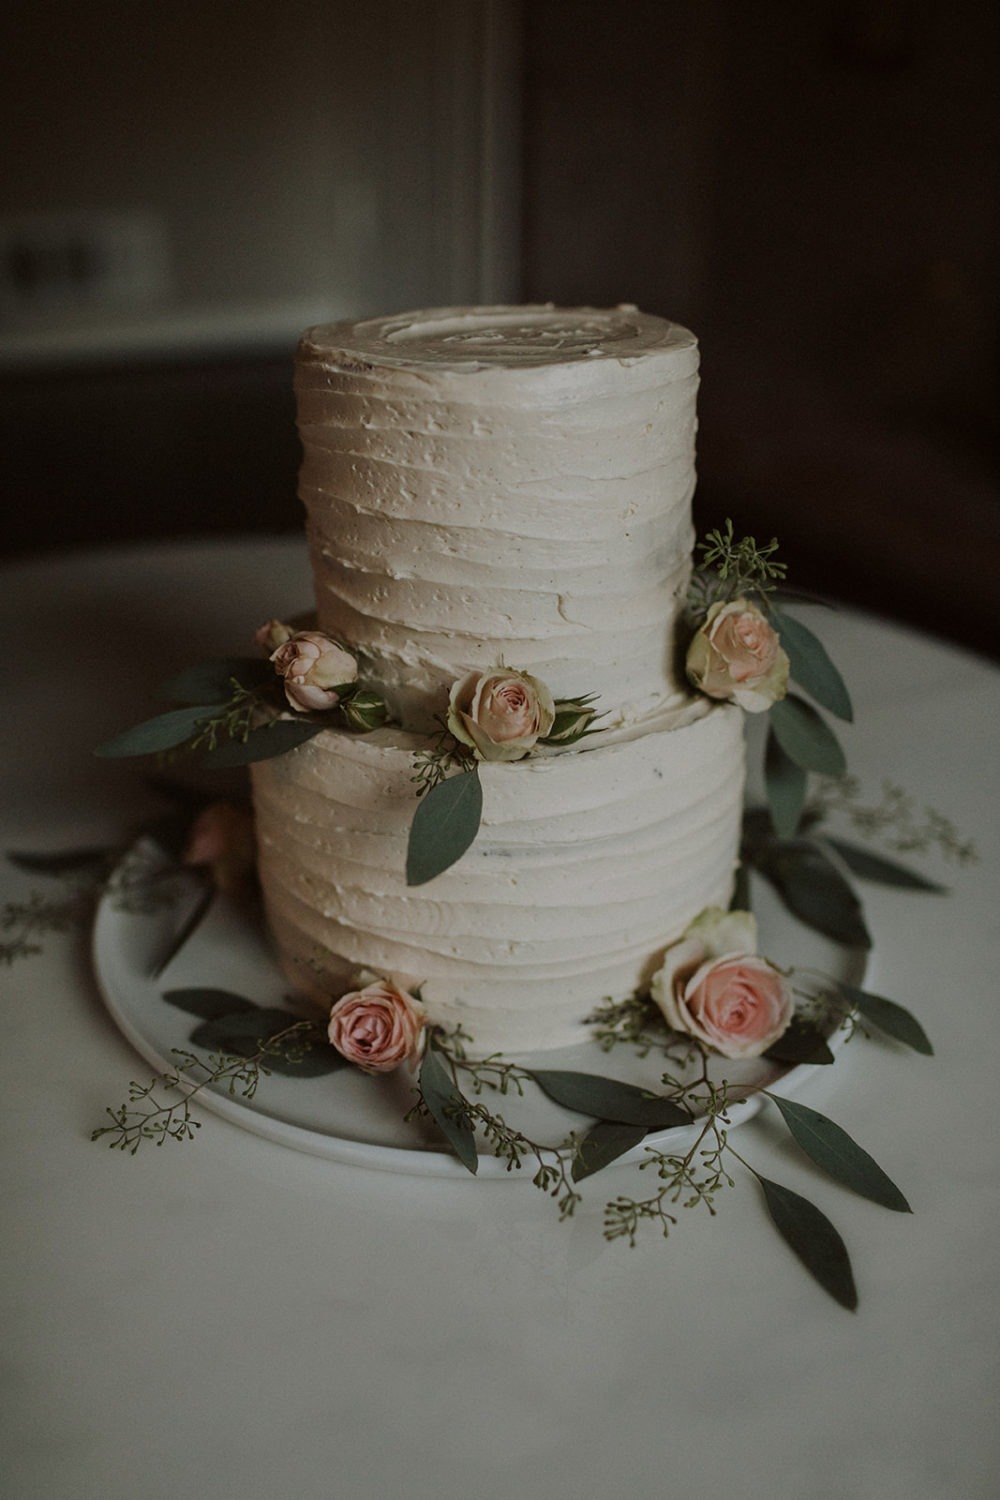 White wedding cake decorated by flowers